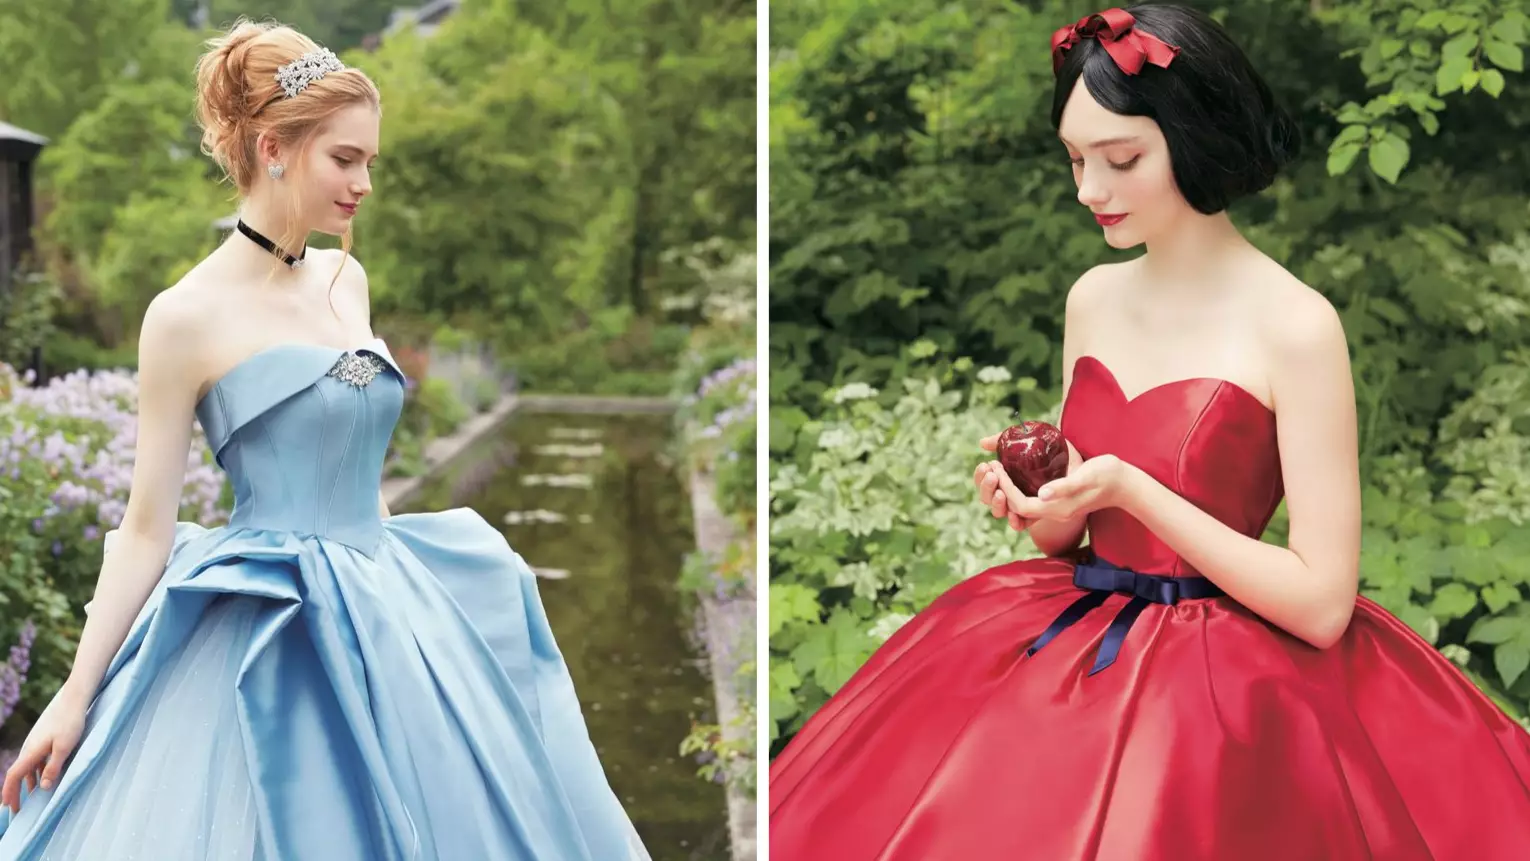 These Disney Princess Wedding Gowns Are What Fairy Tale Dreams Are Made Of